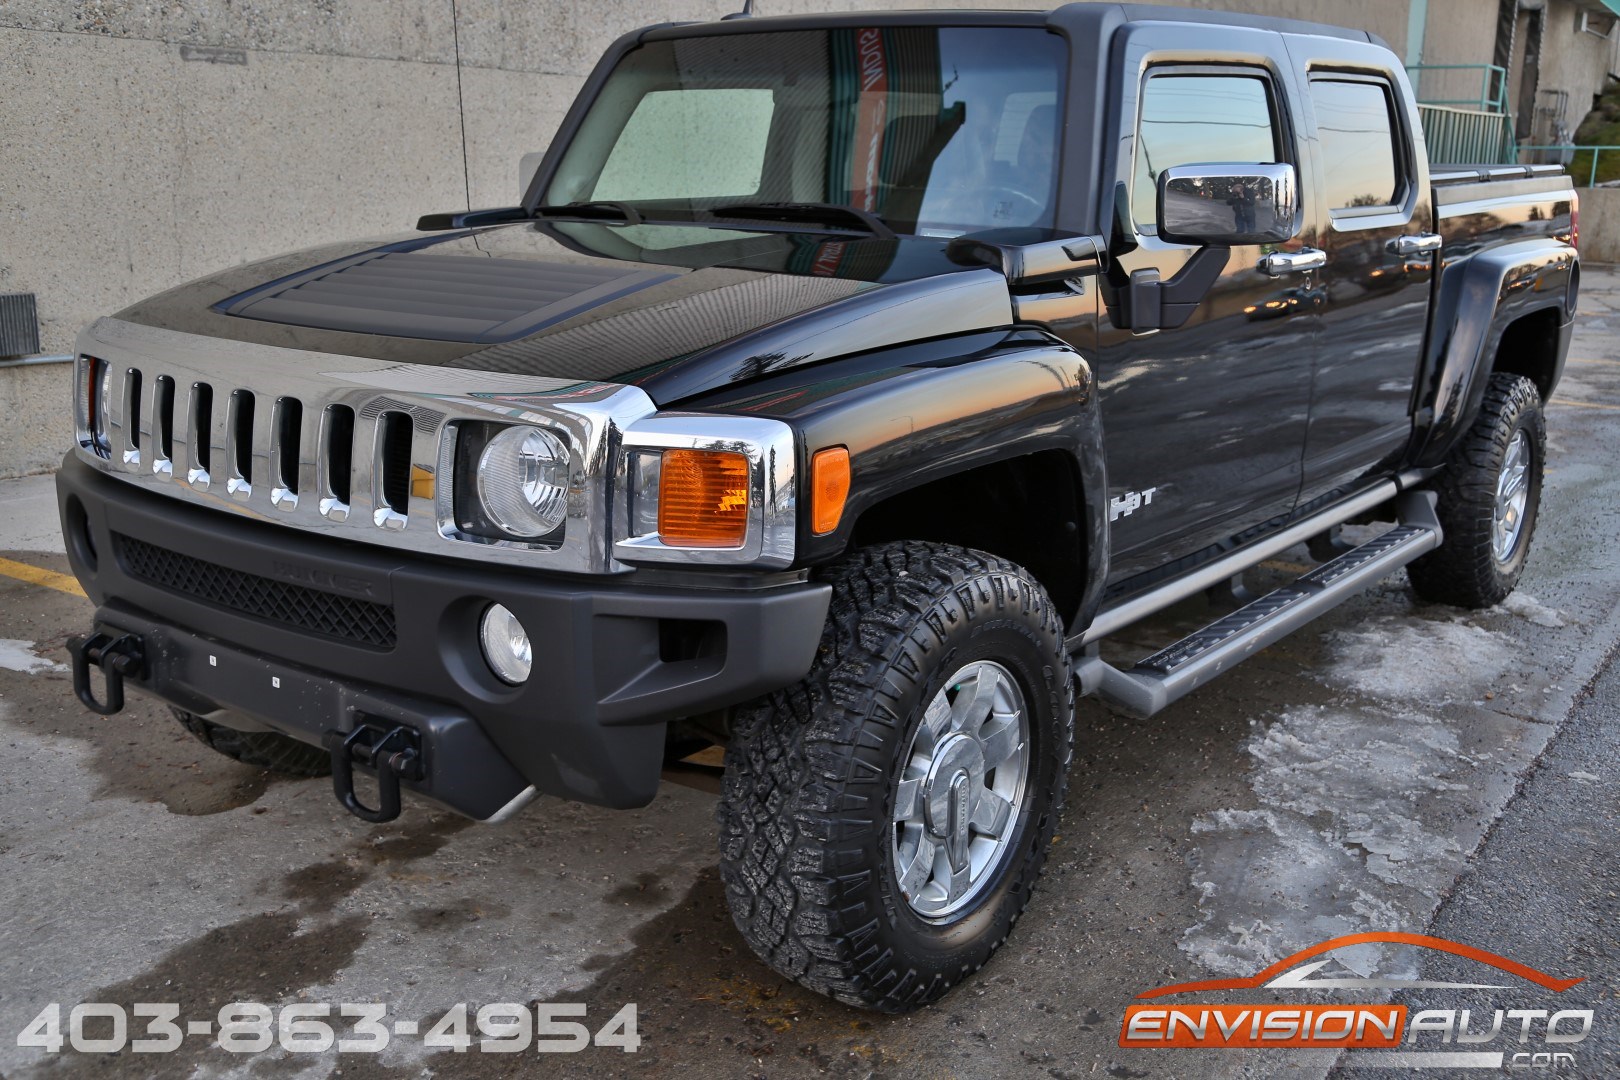 2010 H3T Hummer Truck Luxury Pkg 4×4 – Final Year Produced! - Envision Auto